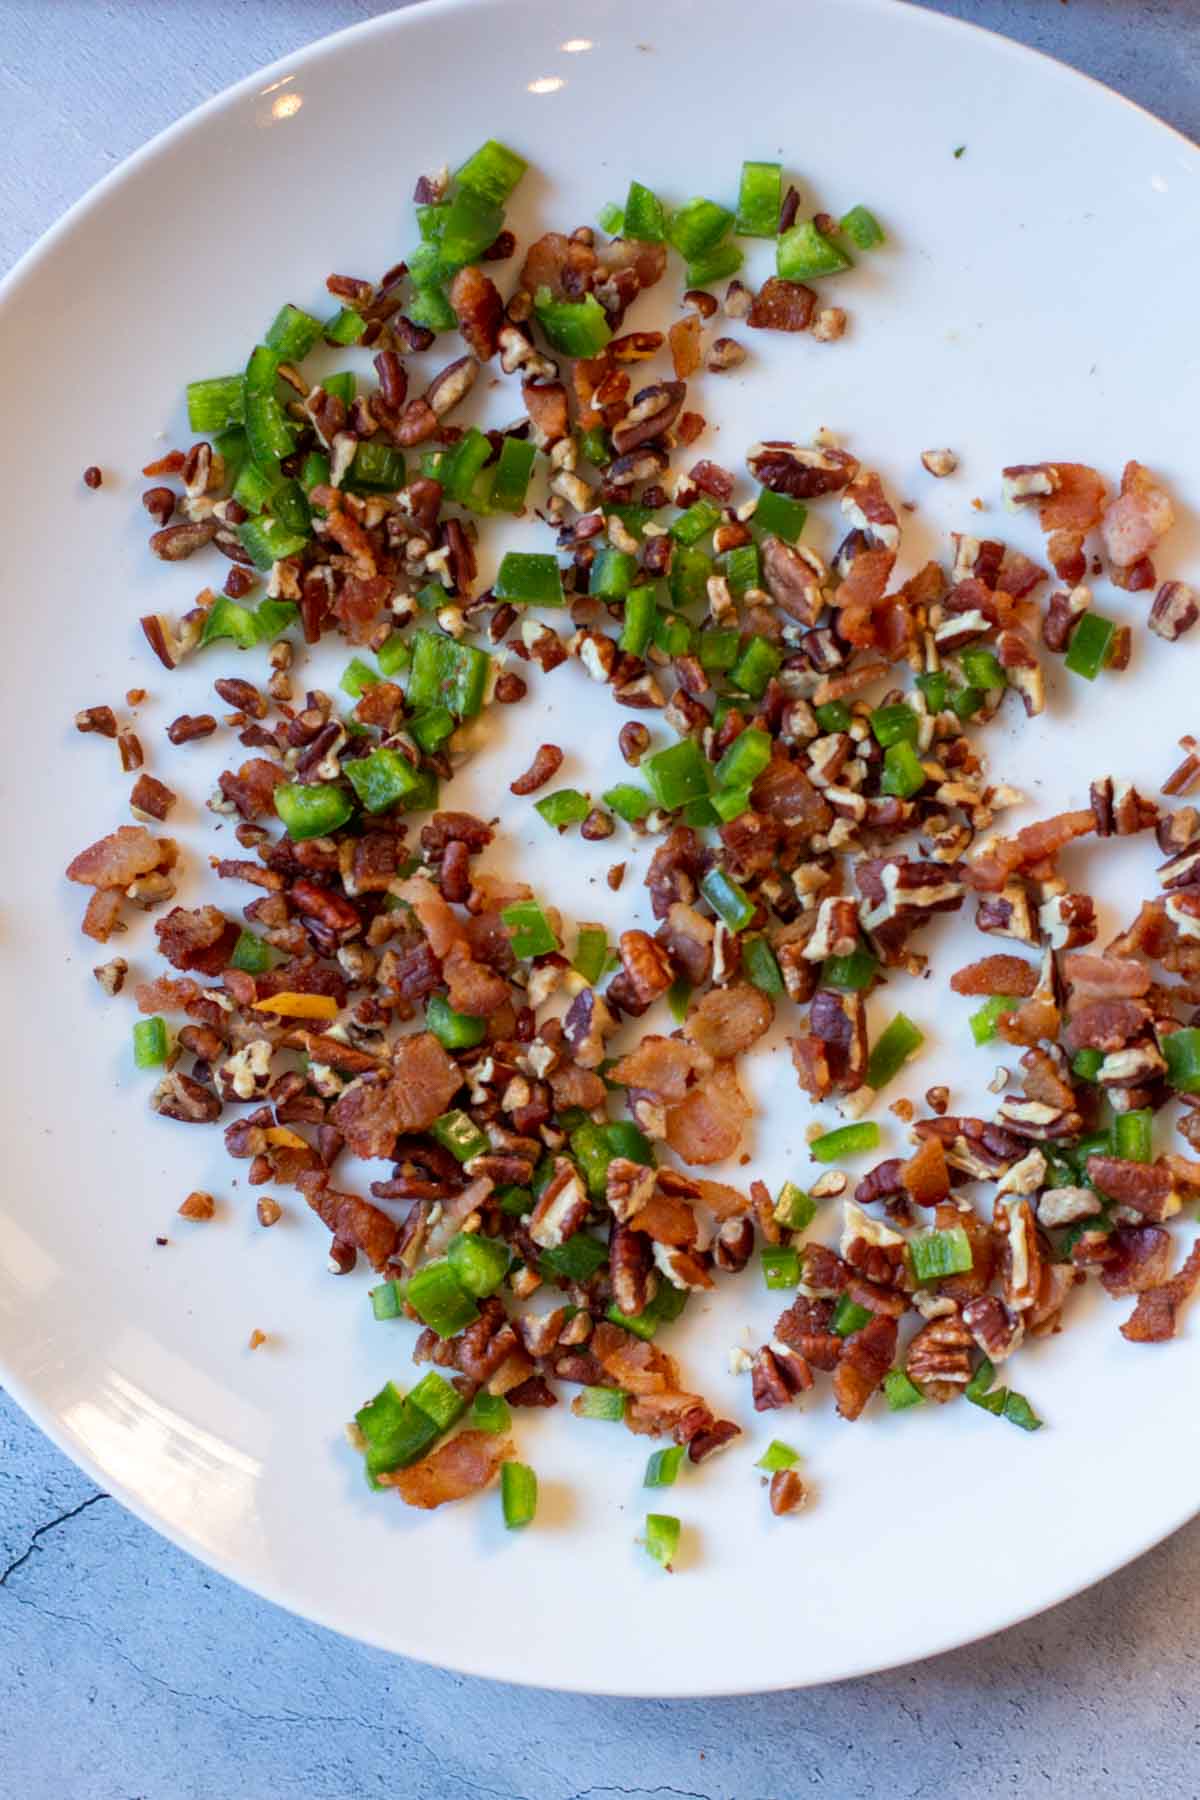 Bacon, jalapeno and pecans on a plate.